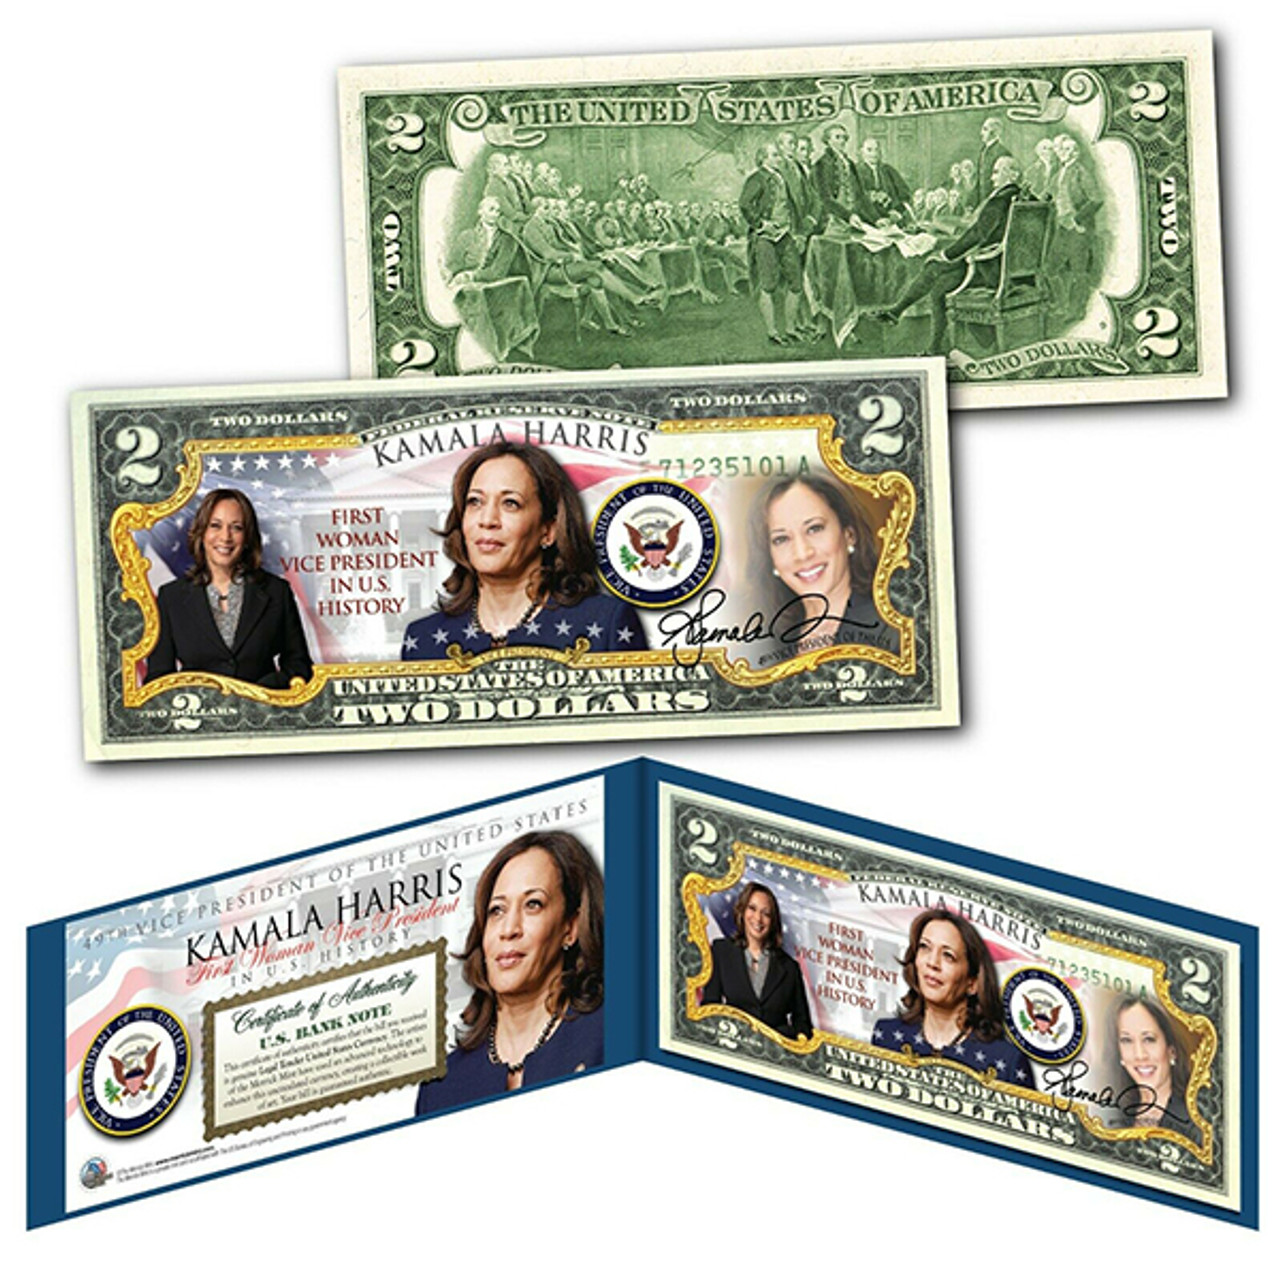 The First and Last Woman on the Dollar Bill